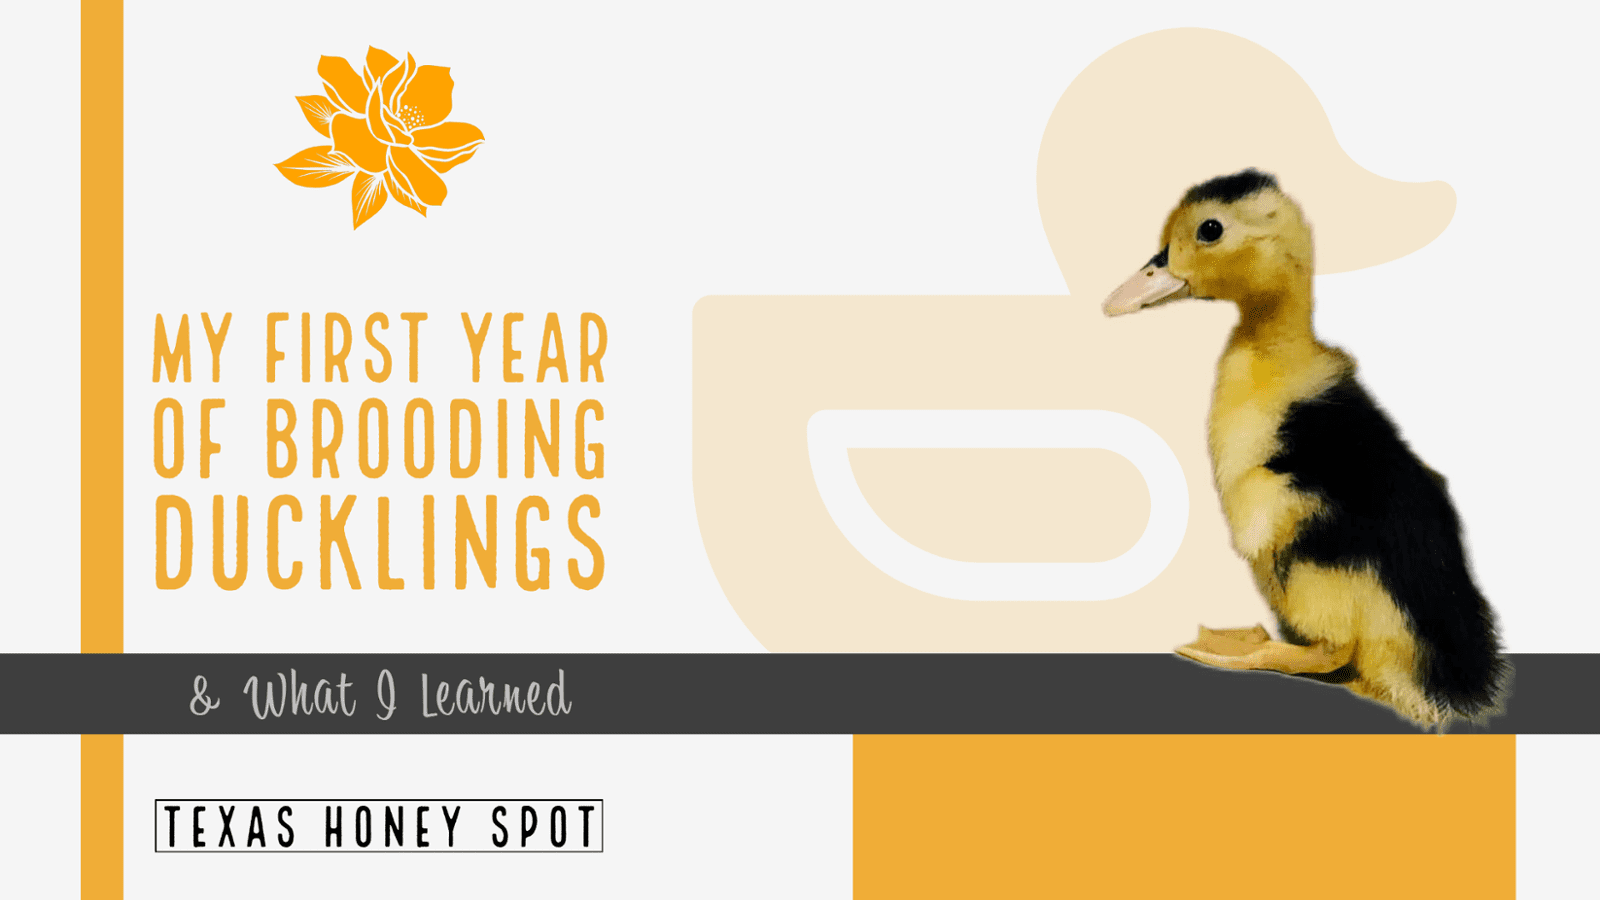 What I Learned In My First Year of Brooding Ducklings